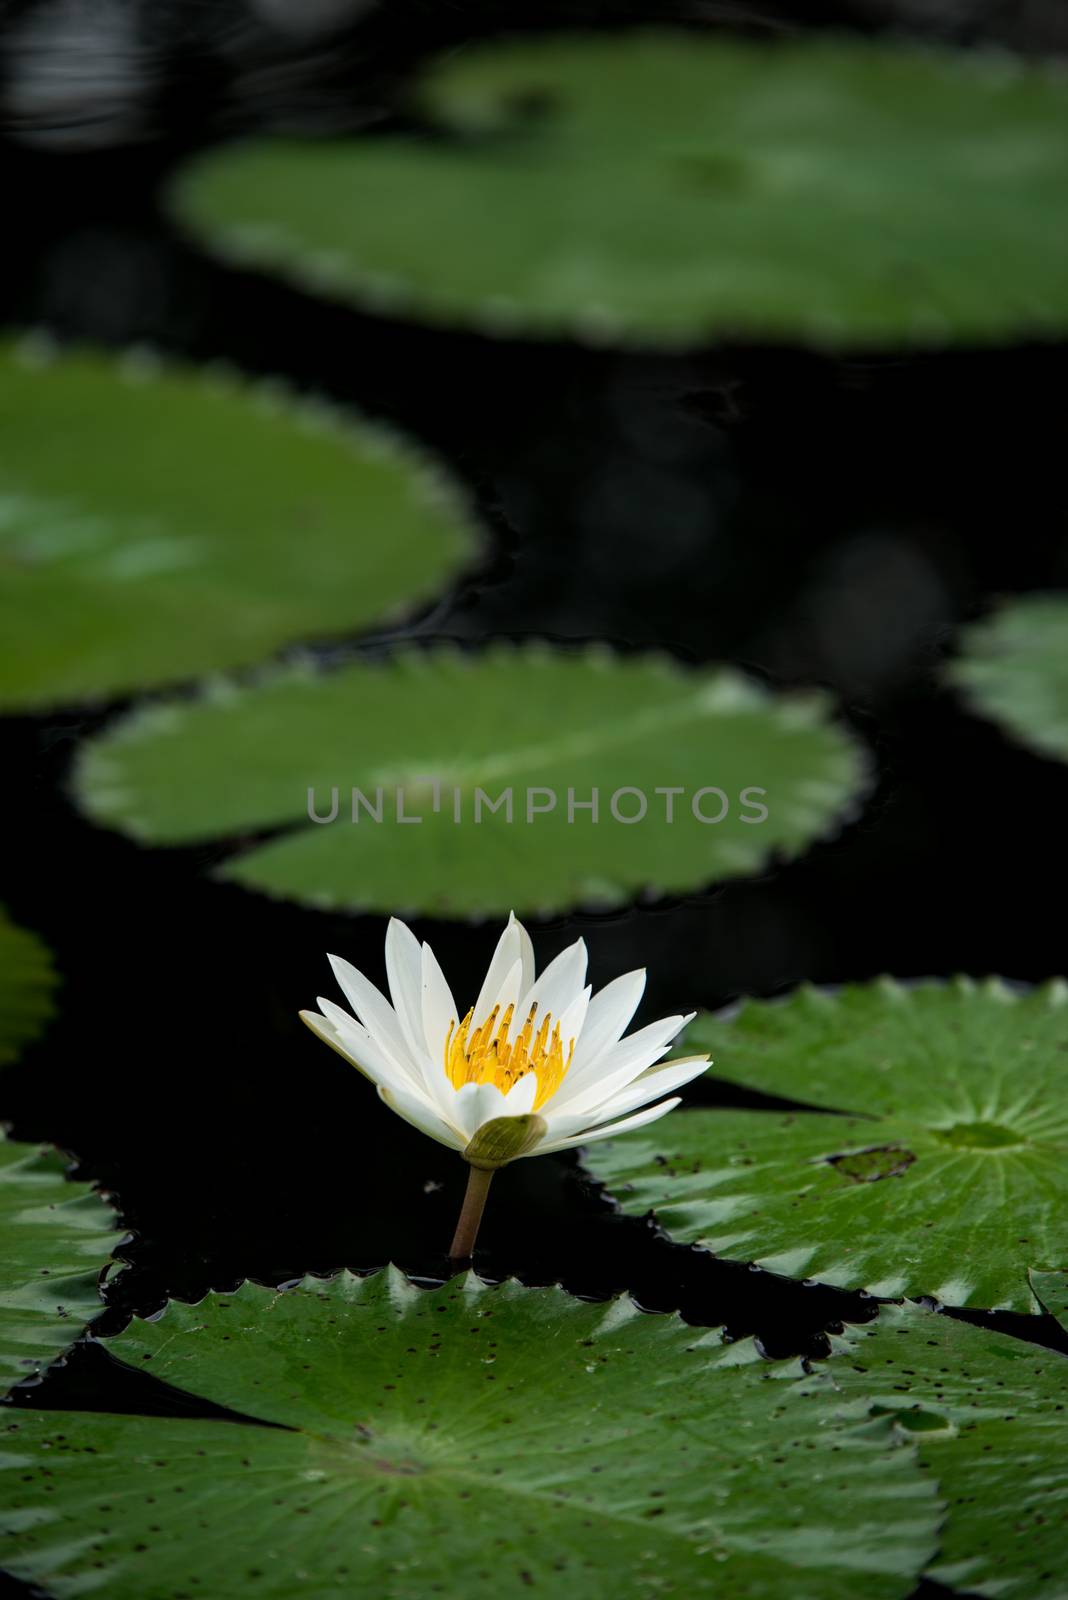 white water lily flowers in pond